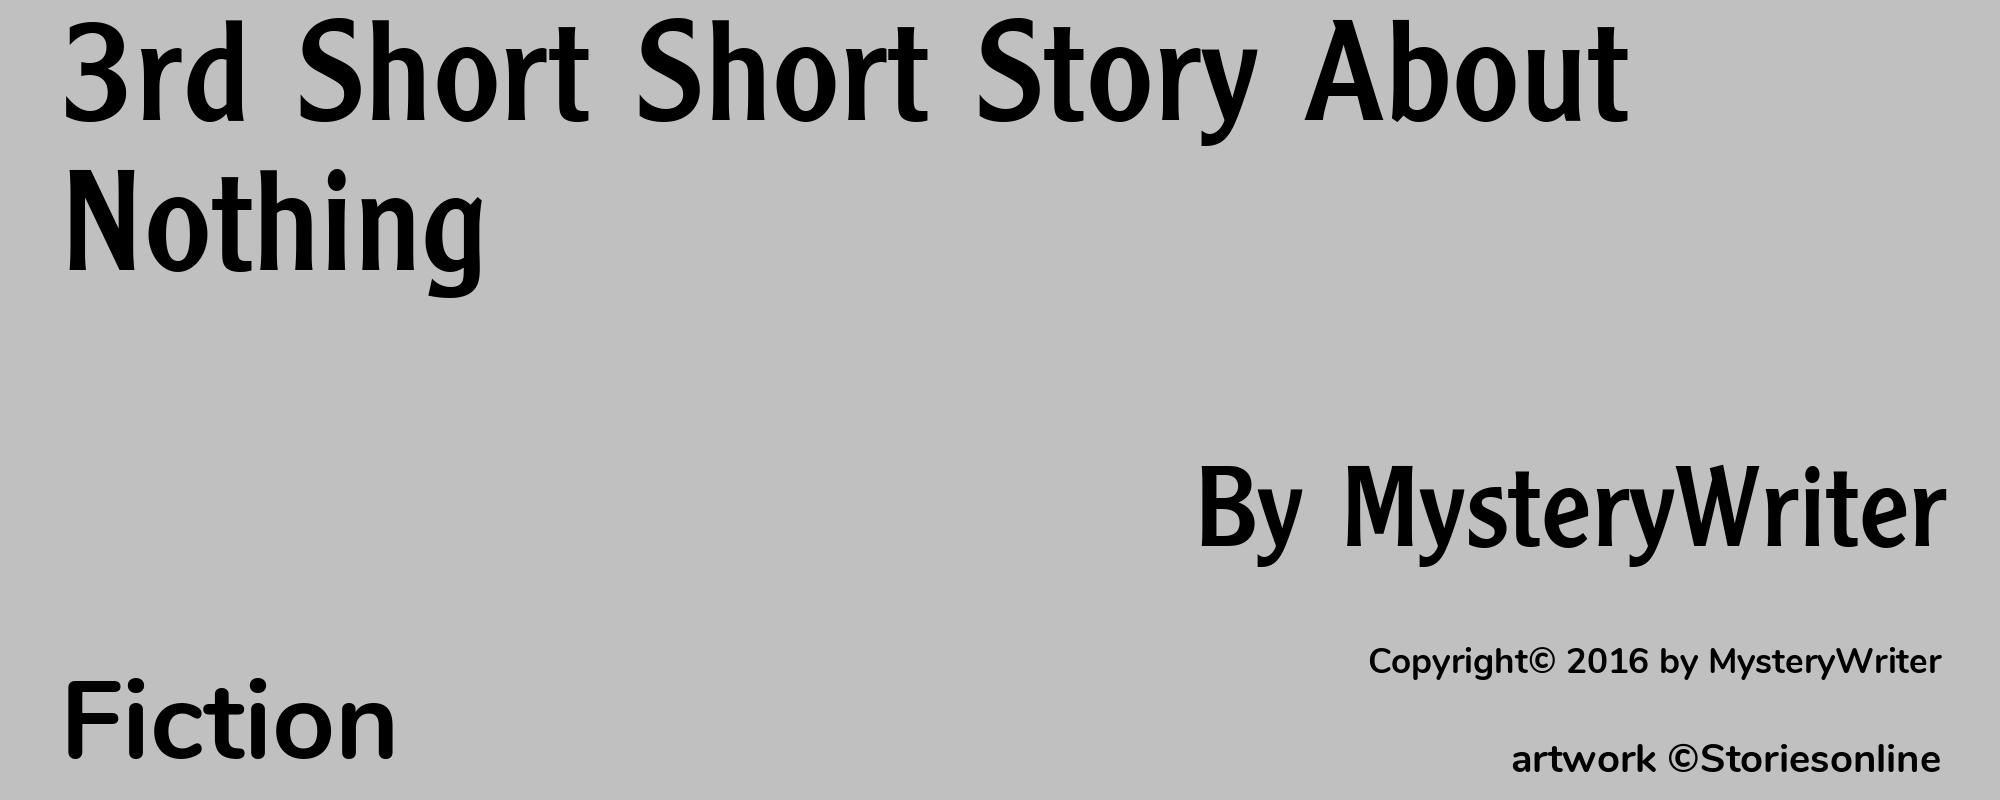 3rd Short Short Story About Nothing - Cover